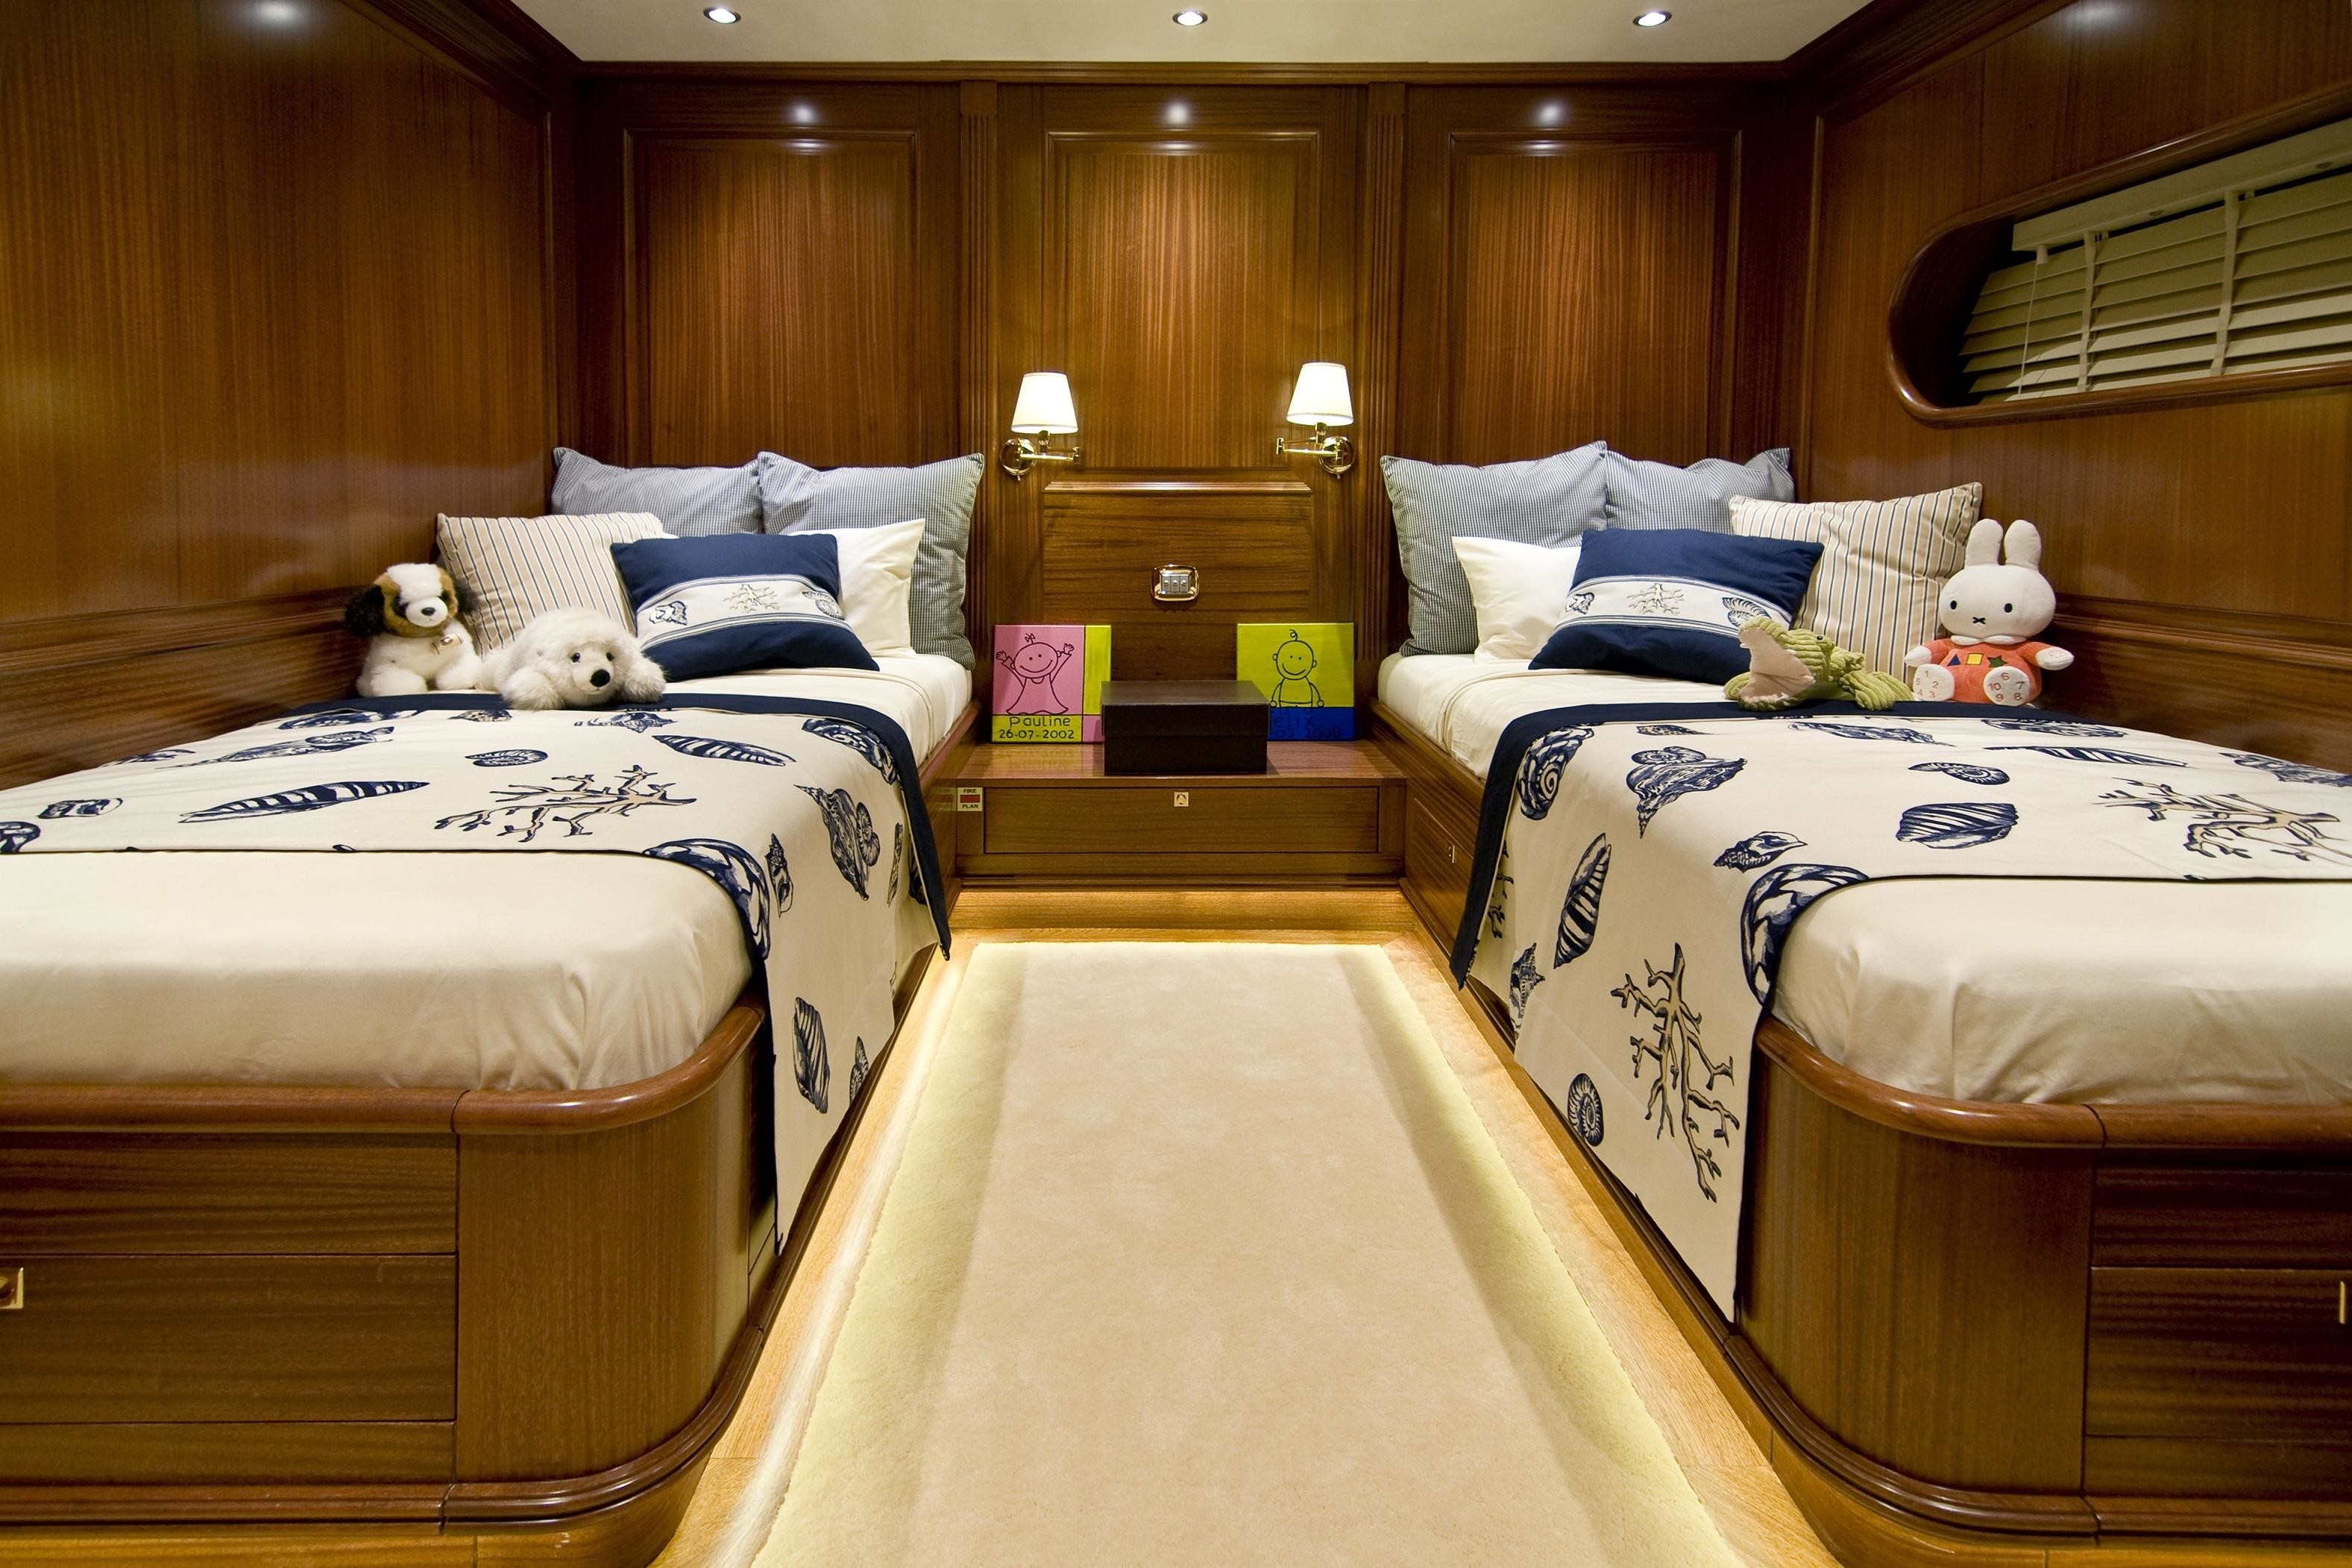 Profile: Yacht CLEAR EYES's Twin Bed Cabin Captured